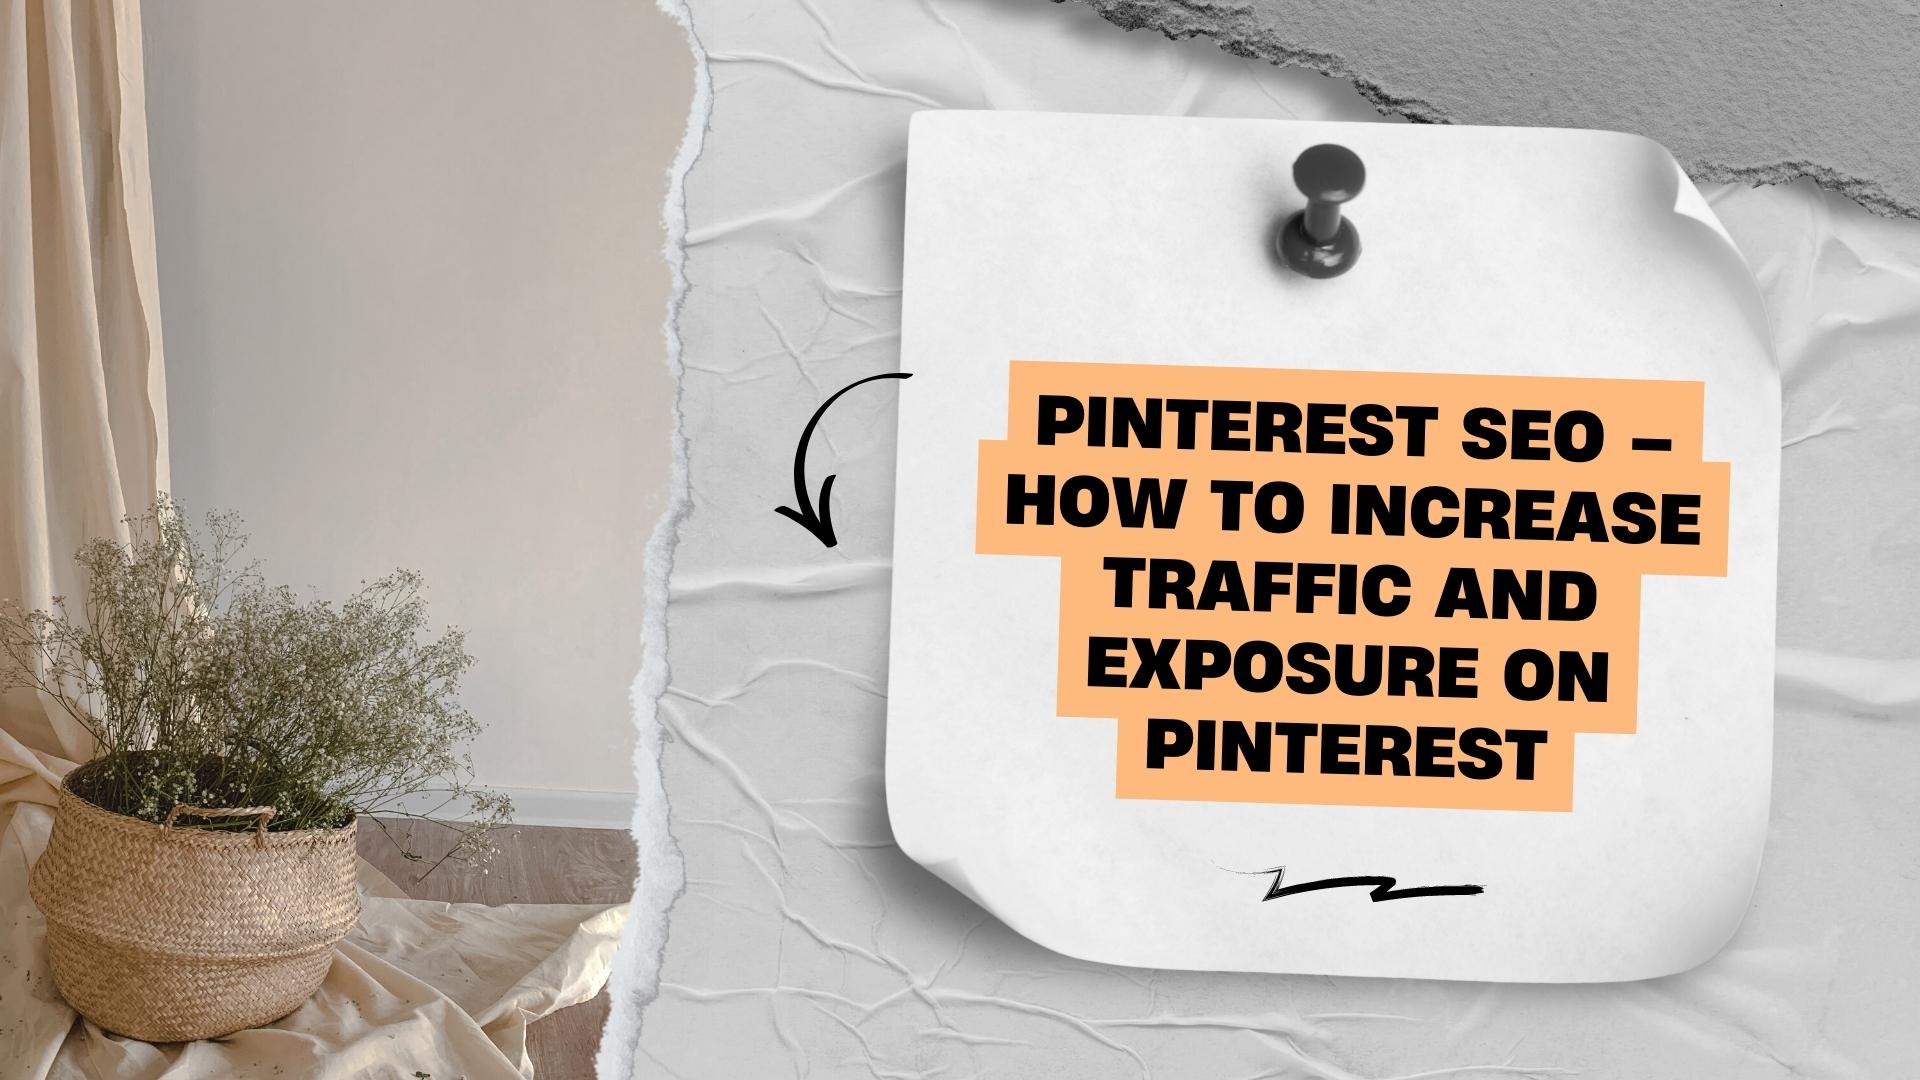 Pinterest SEO – How to Increase Traffic and Exposure on Pinterest